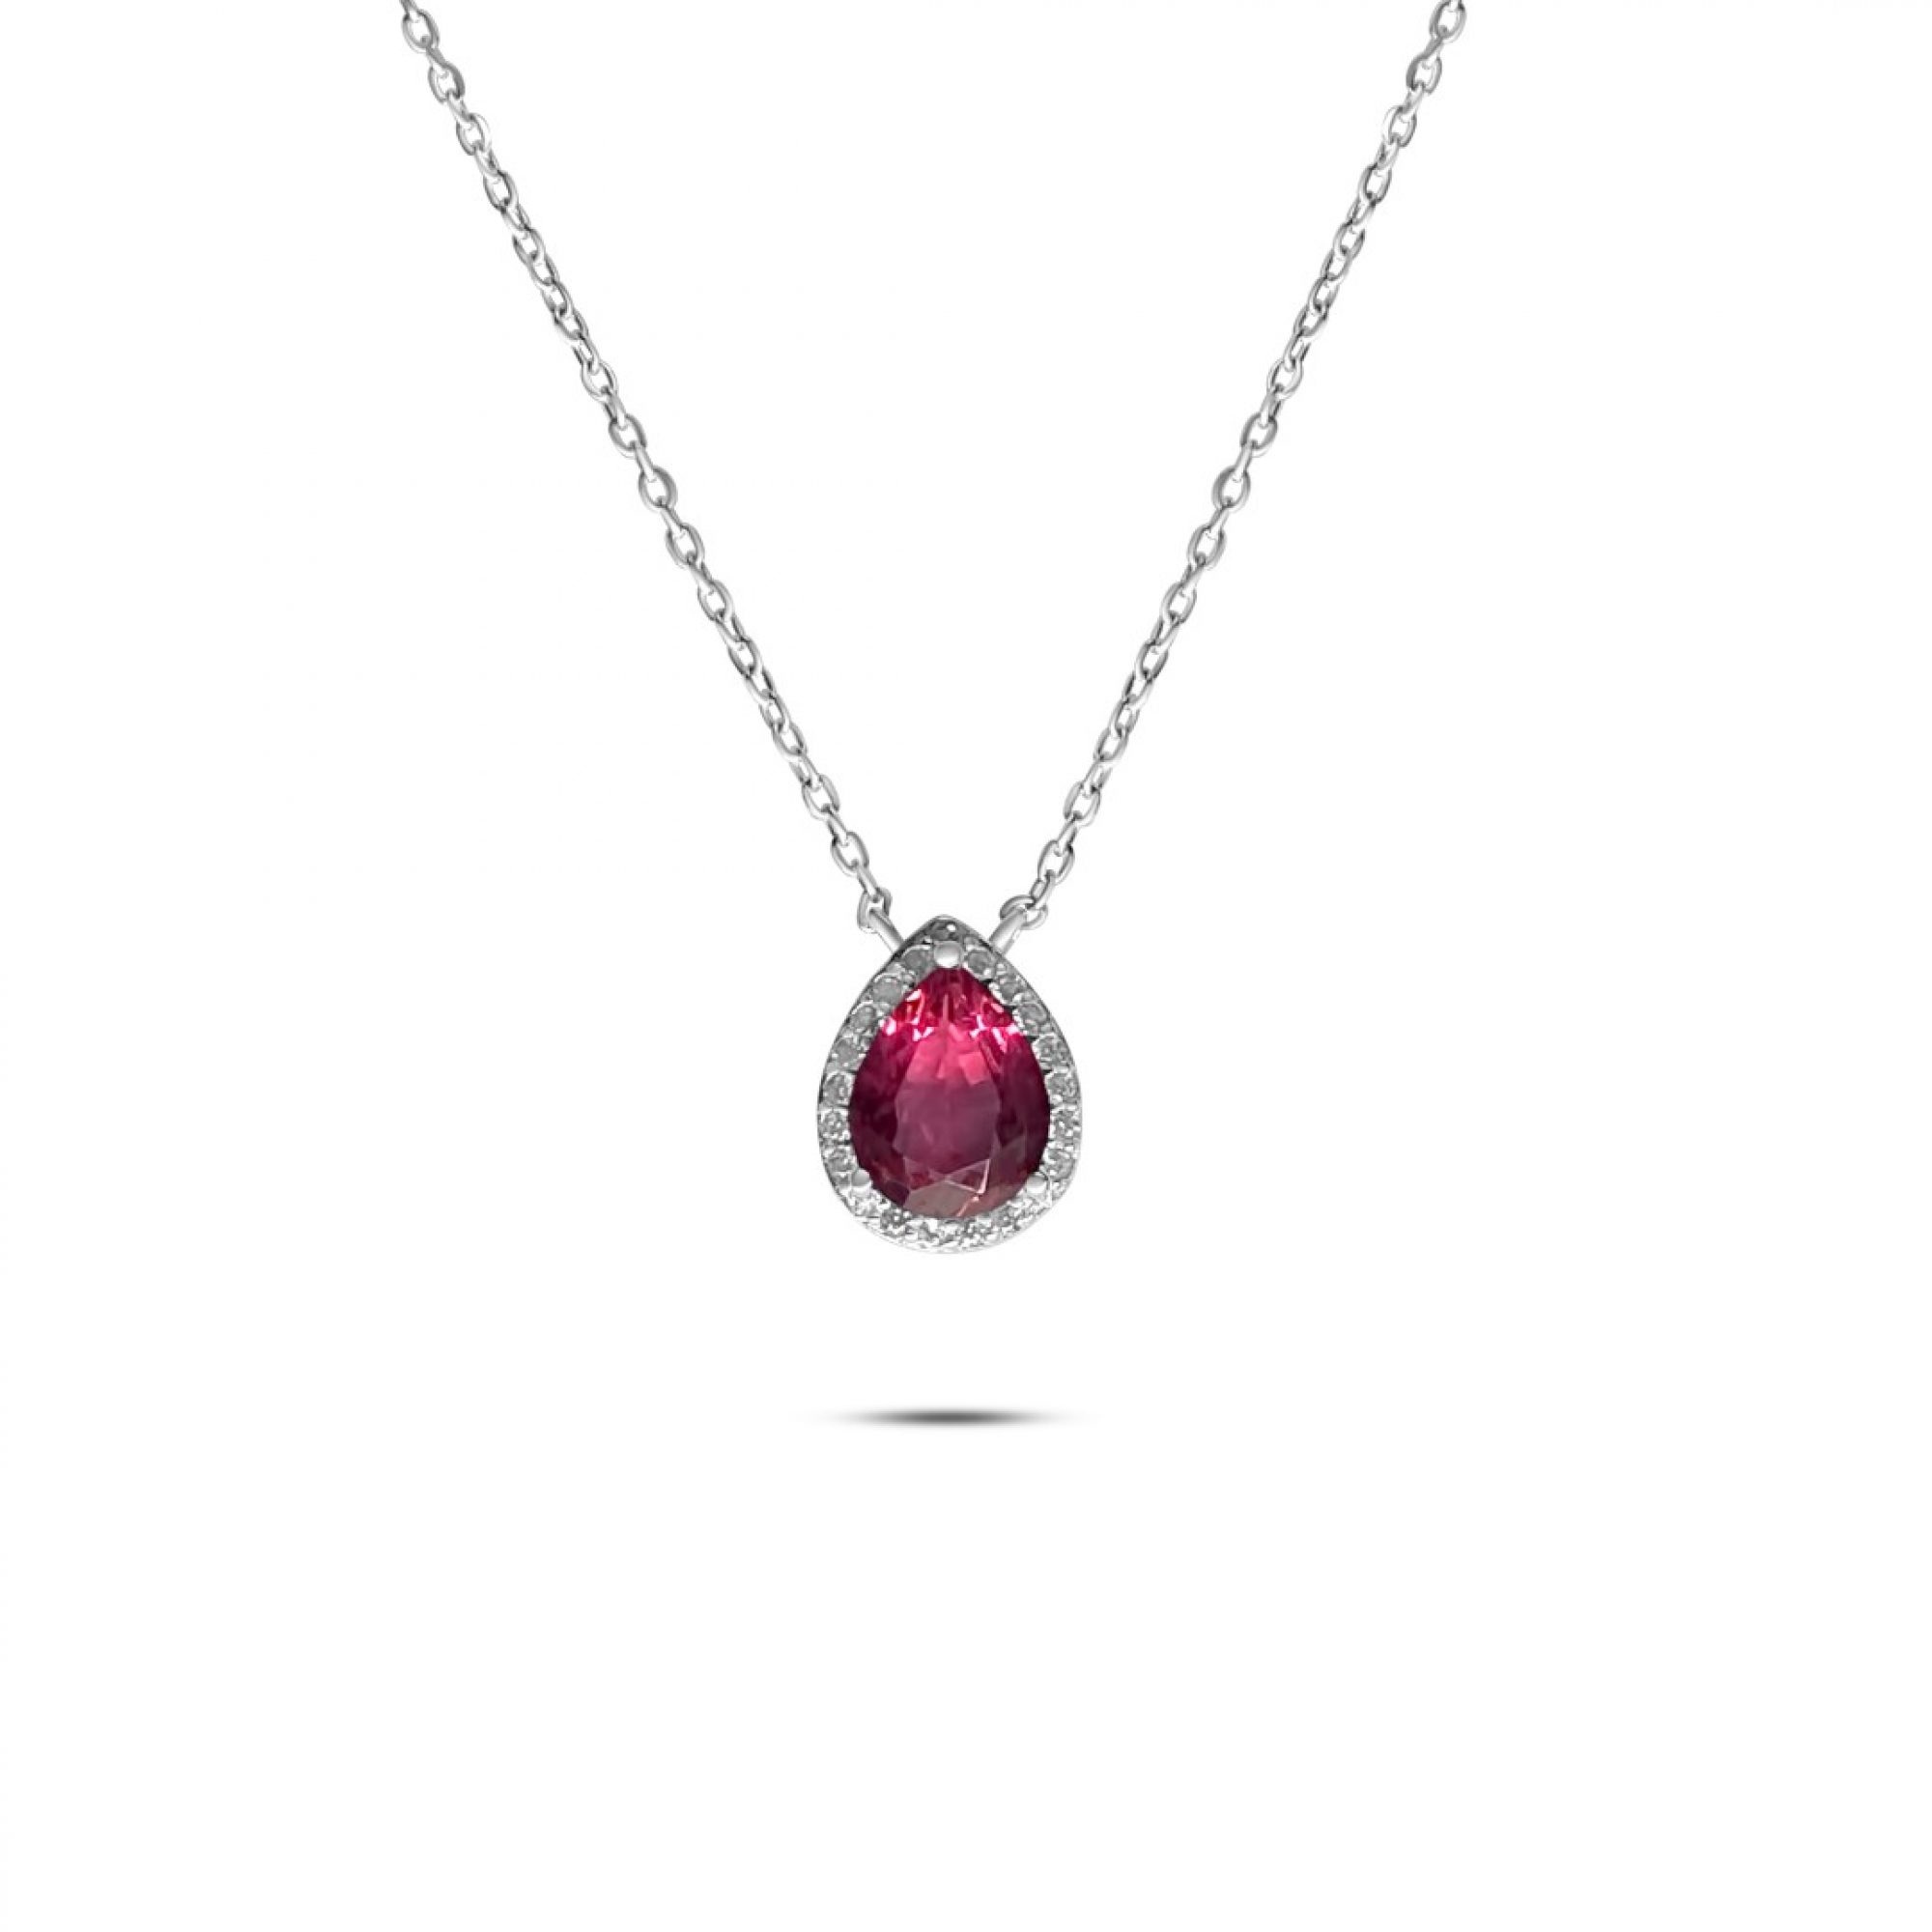 Necklace with ruby and zircon stones